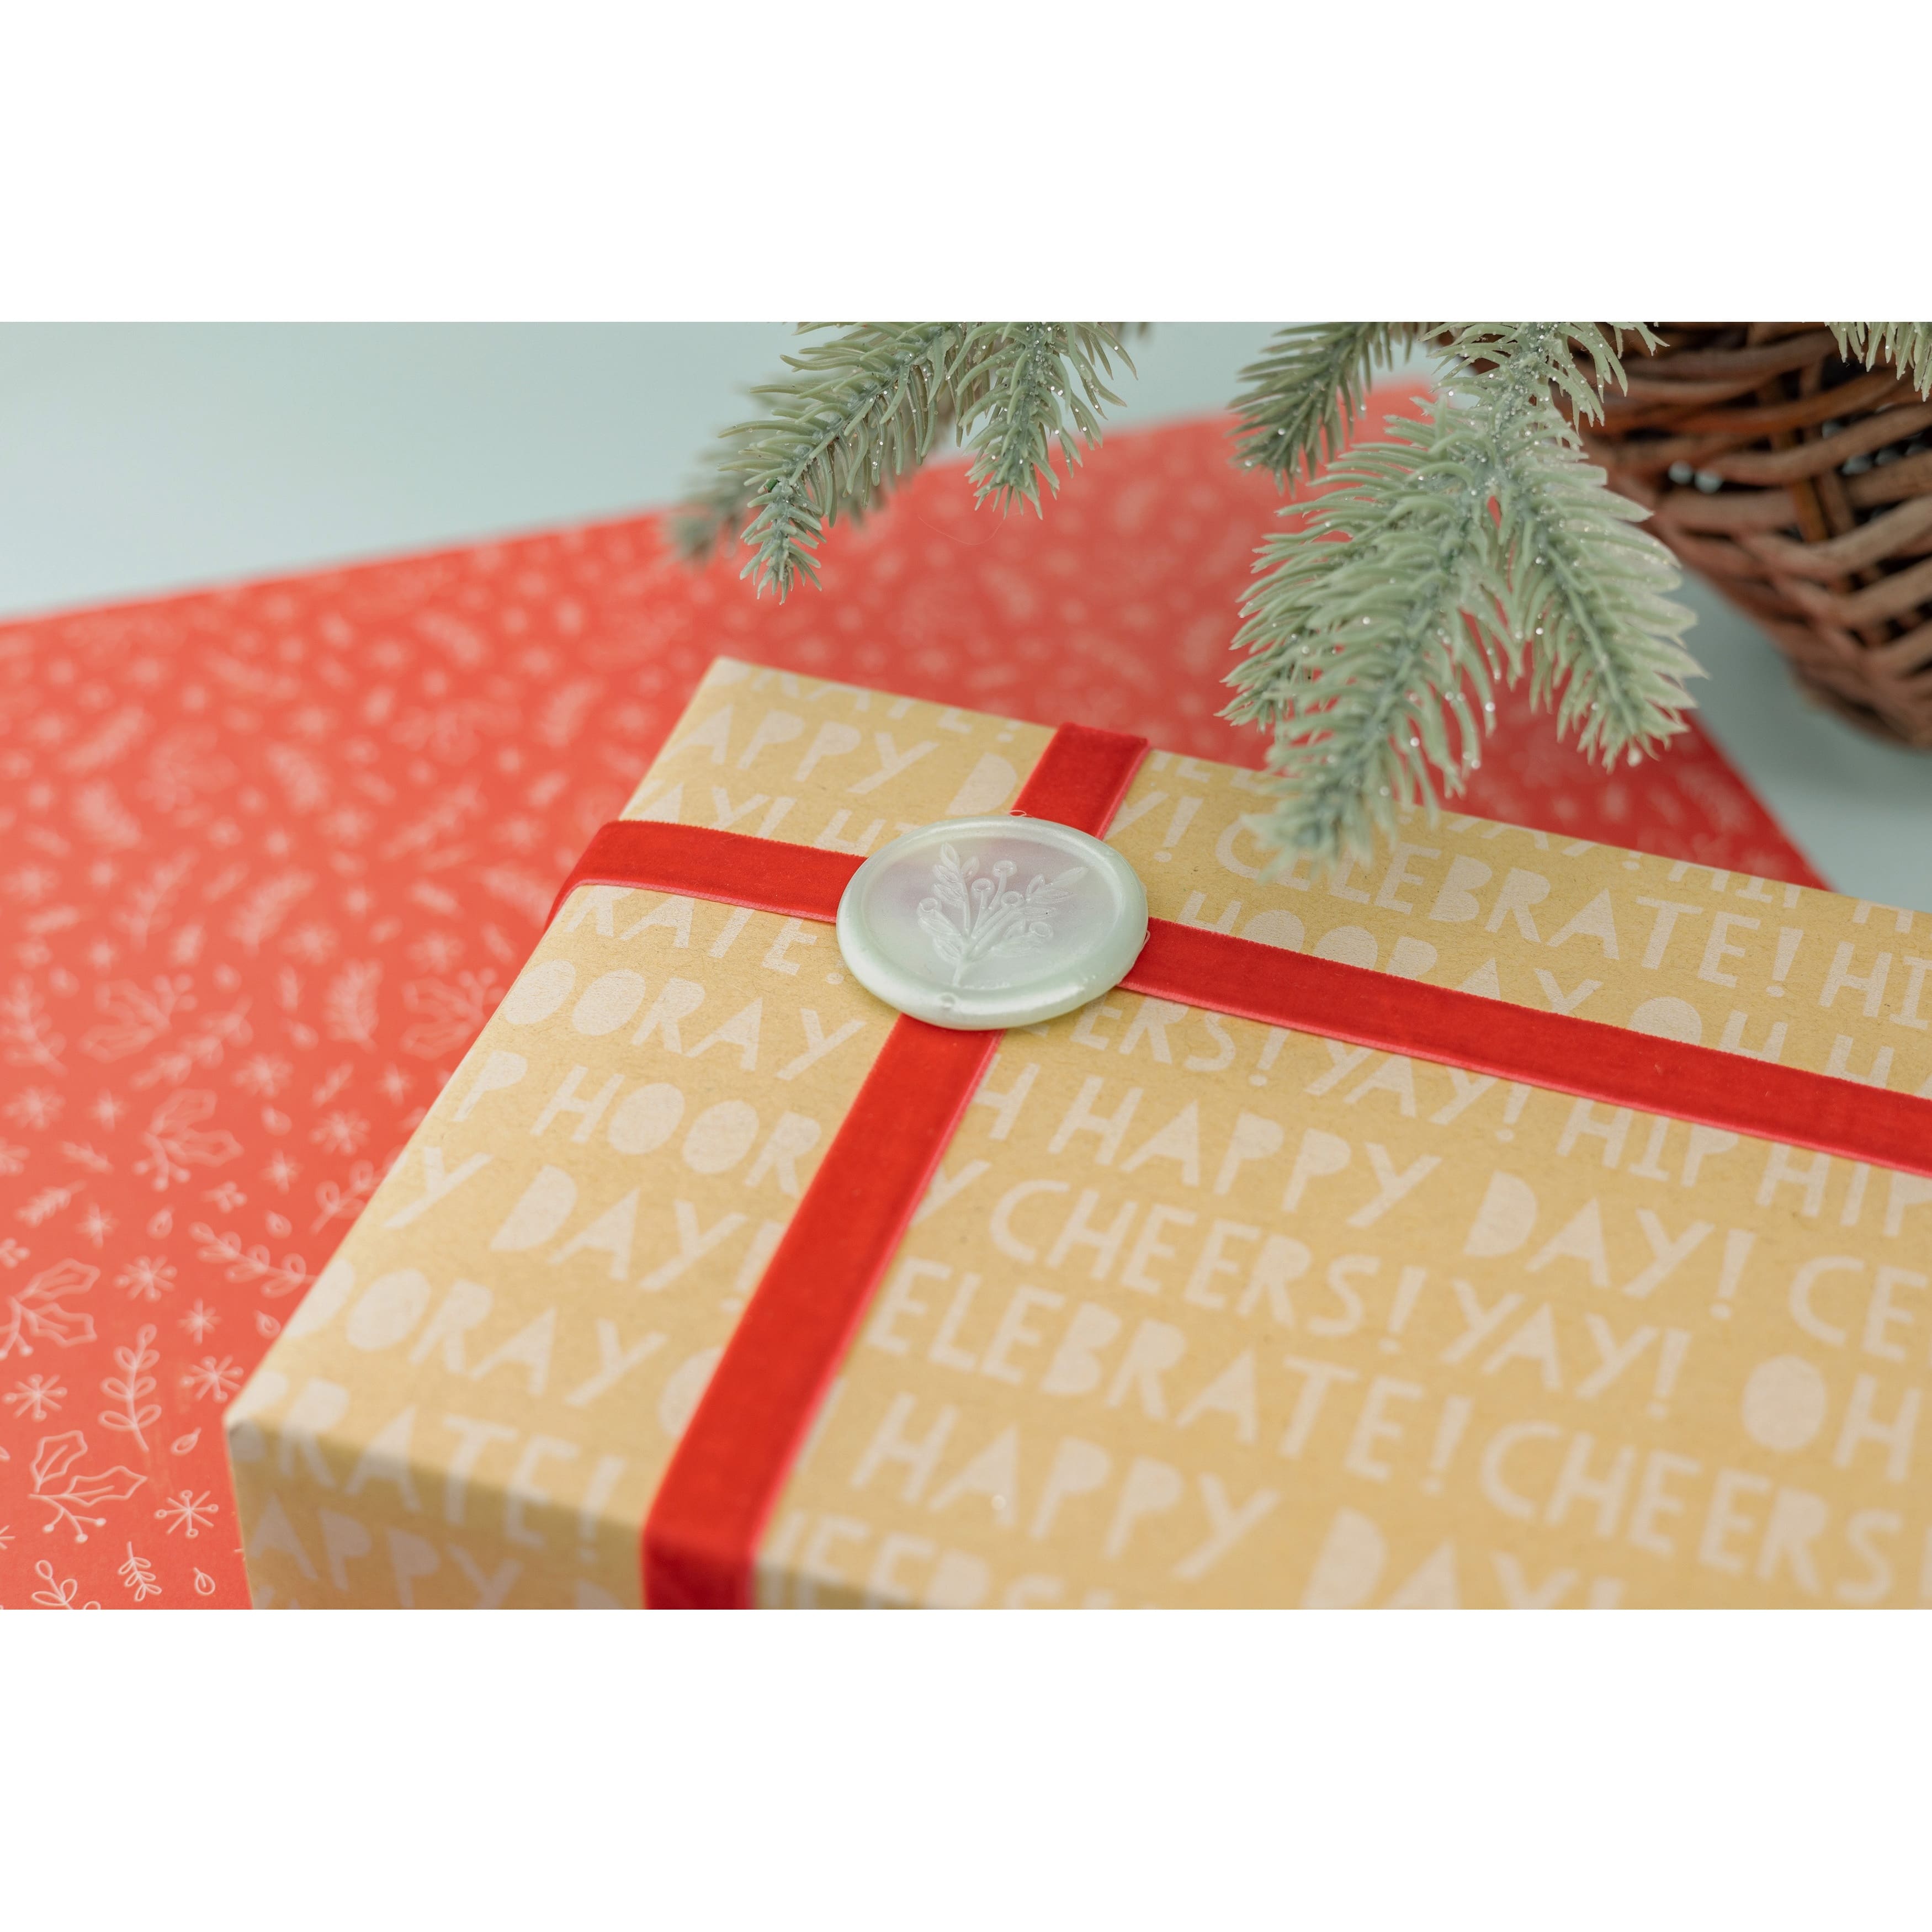 We R Makers > Tools > With Love Envelope Seal Kit - We R Memory Keepers: A  Cherry On Top